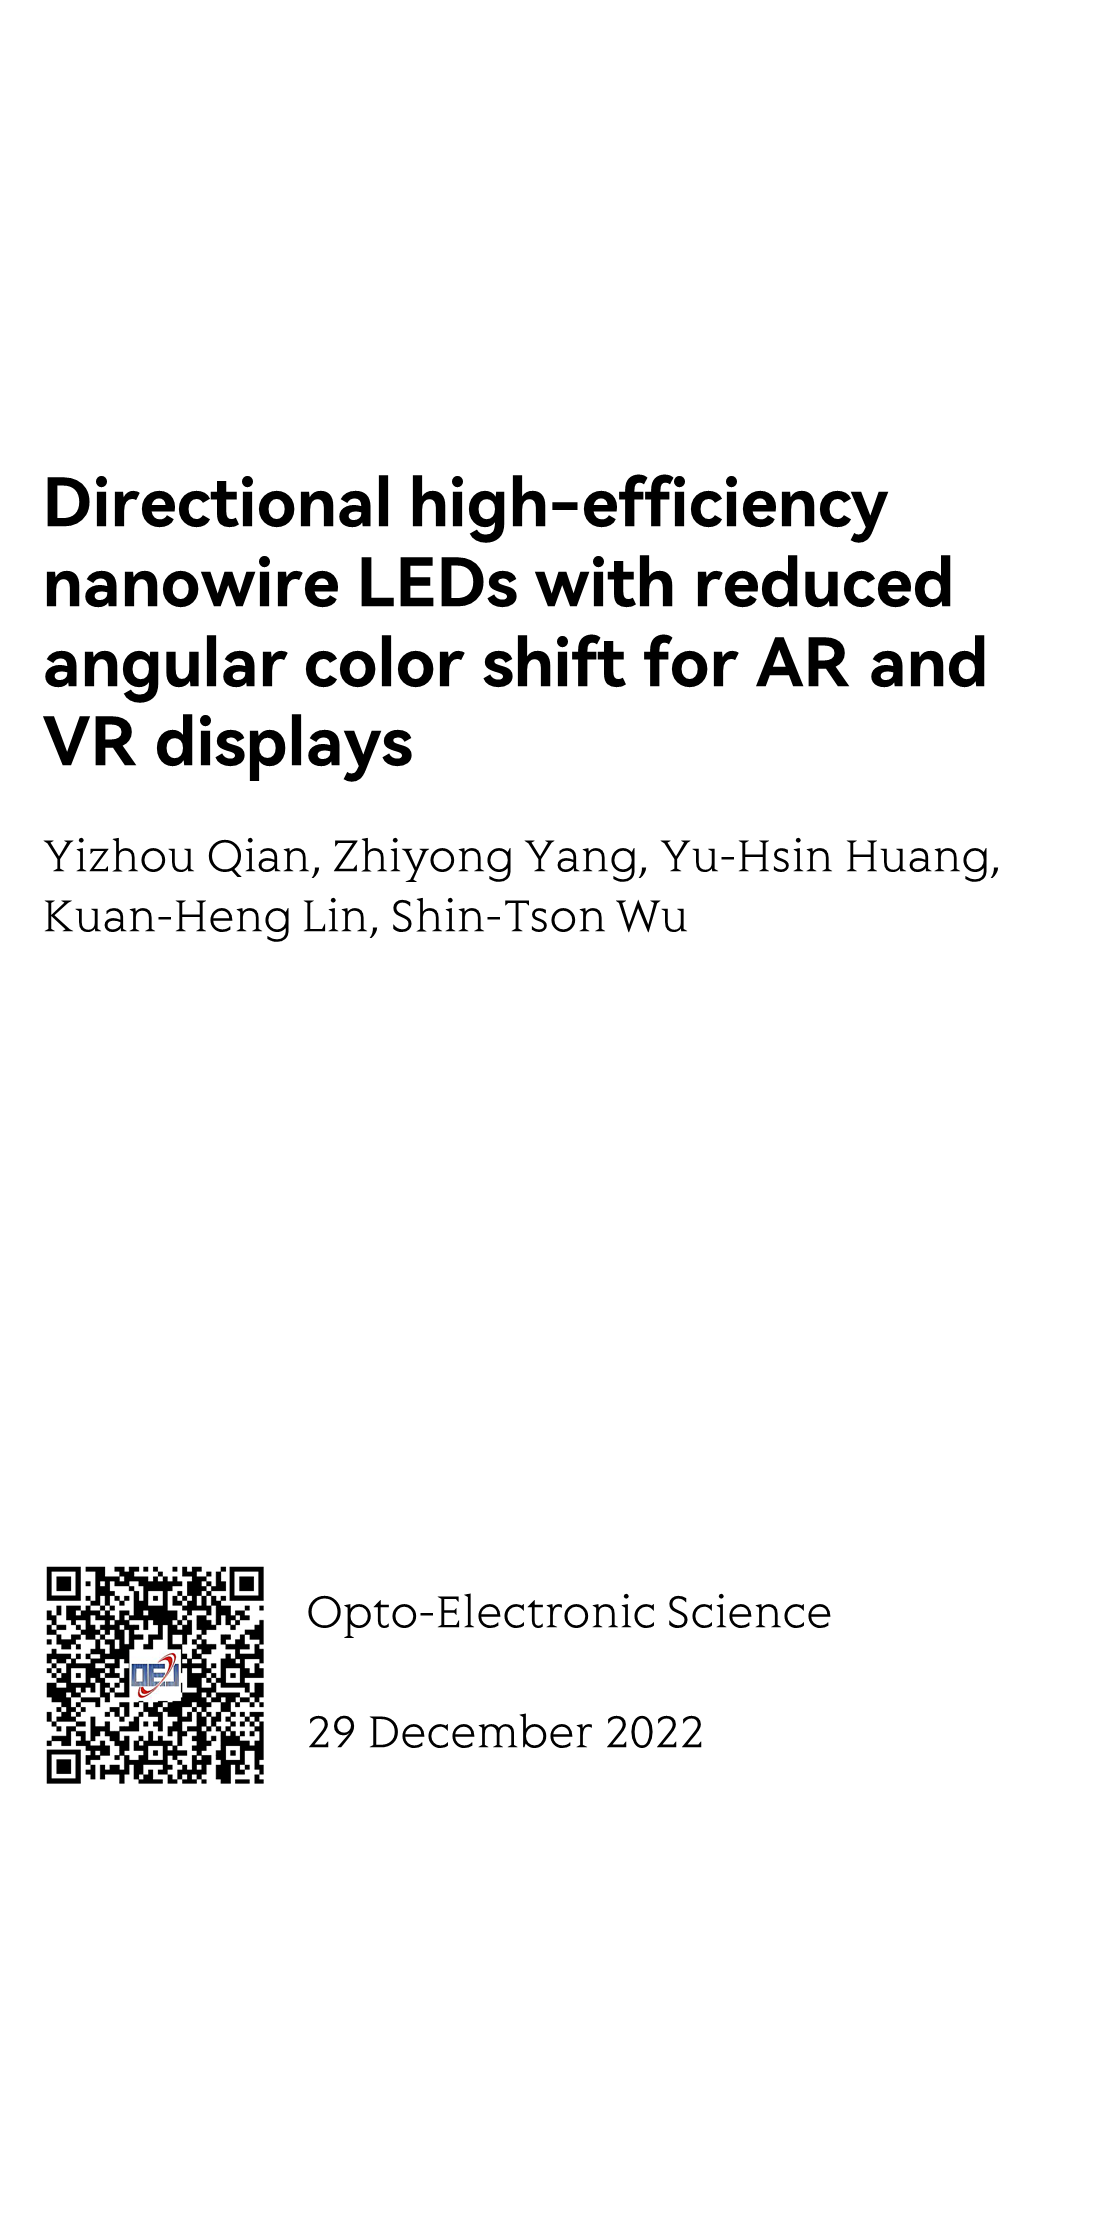 Directional high-efficiency nanowire LEDs with reduced angular color shift for AR and VR displays_1